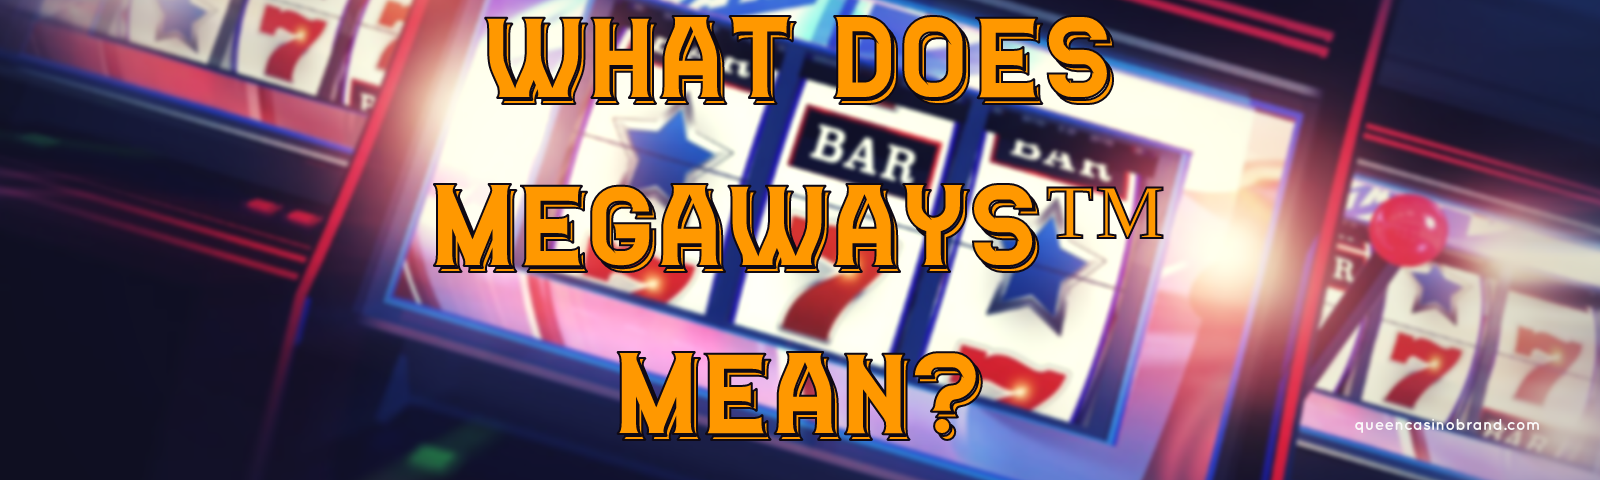 What Does Megaways Mean | Queen Casino Brand